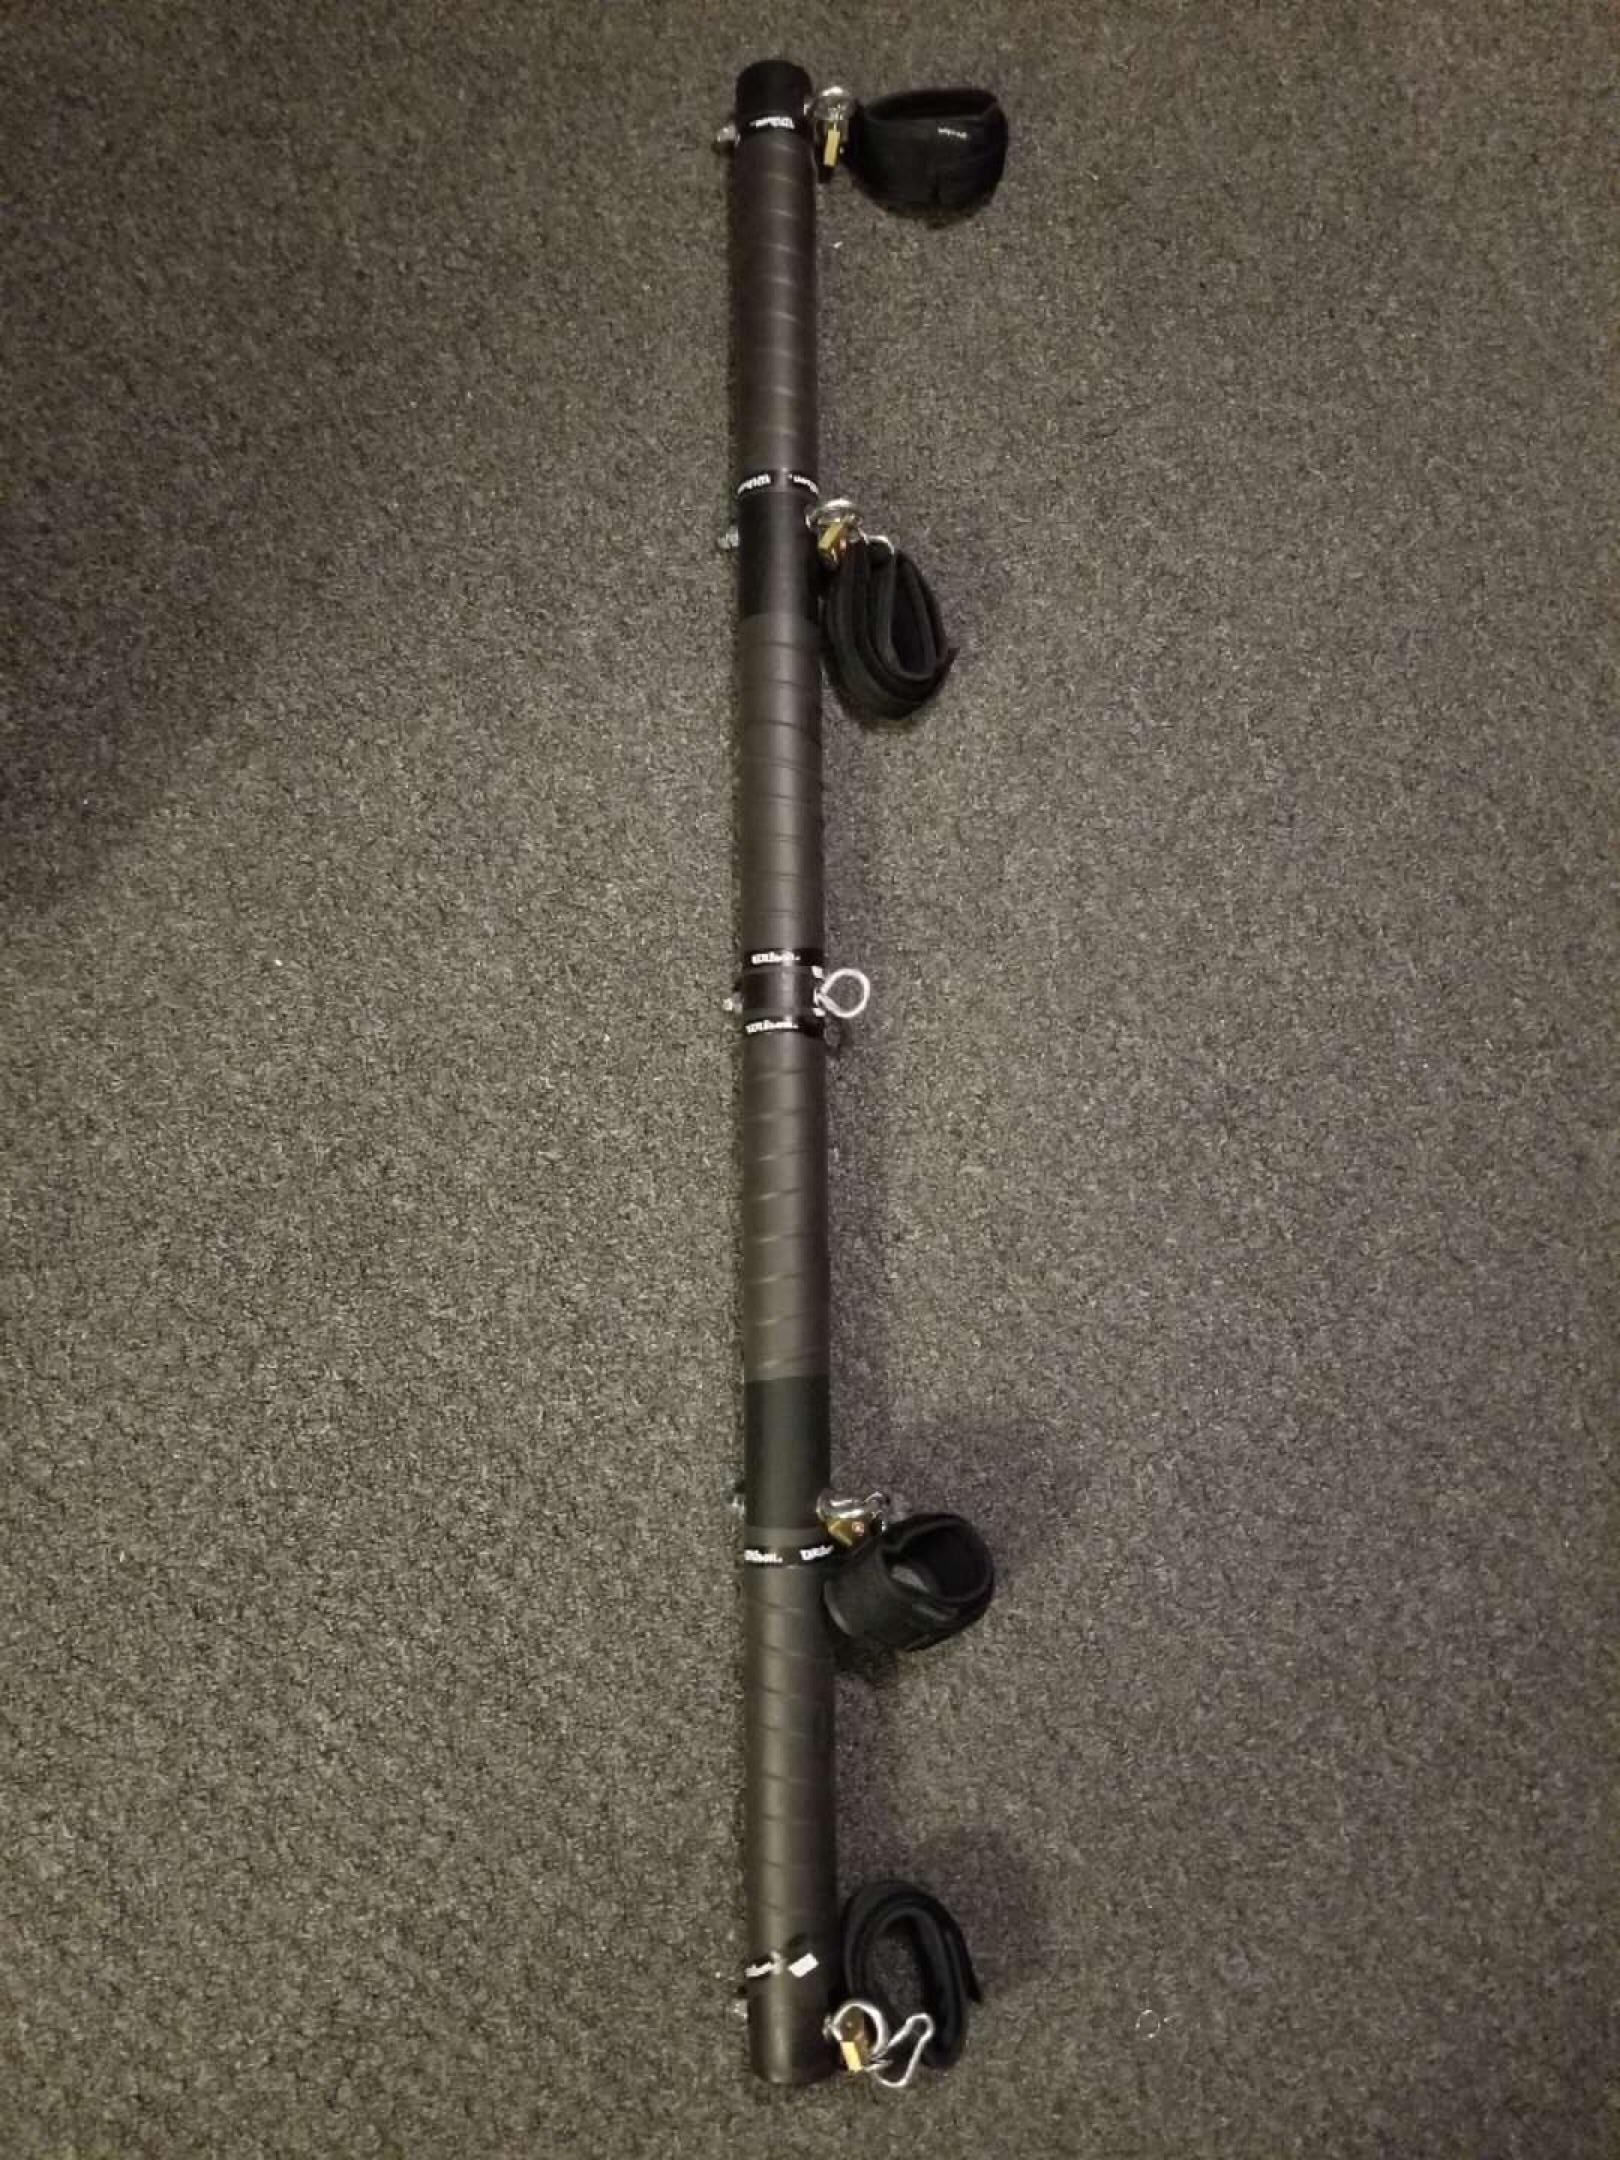 First attempt at a spreader bar. We already had the cuffs, so a few padlocks with the same key make it work great.